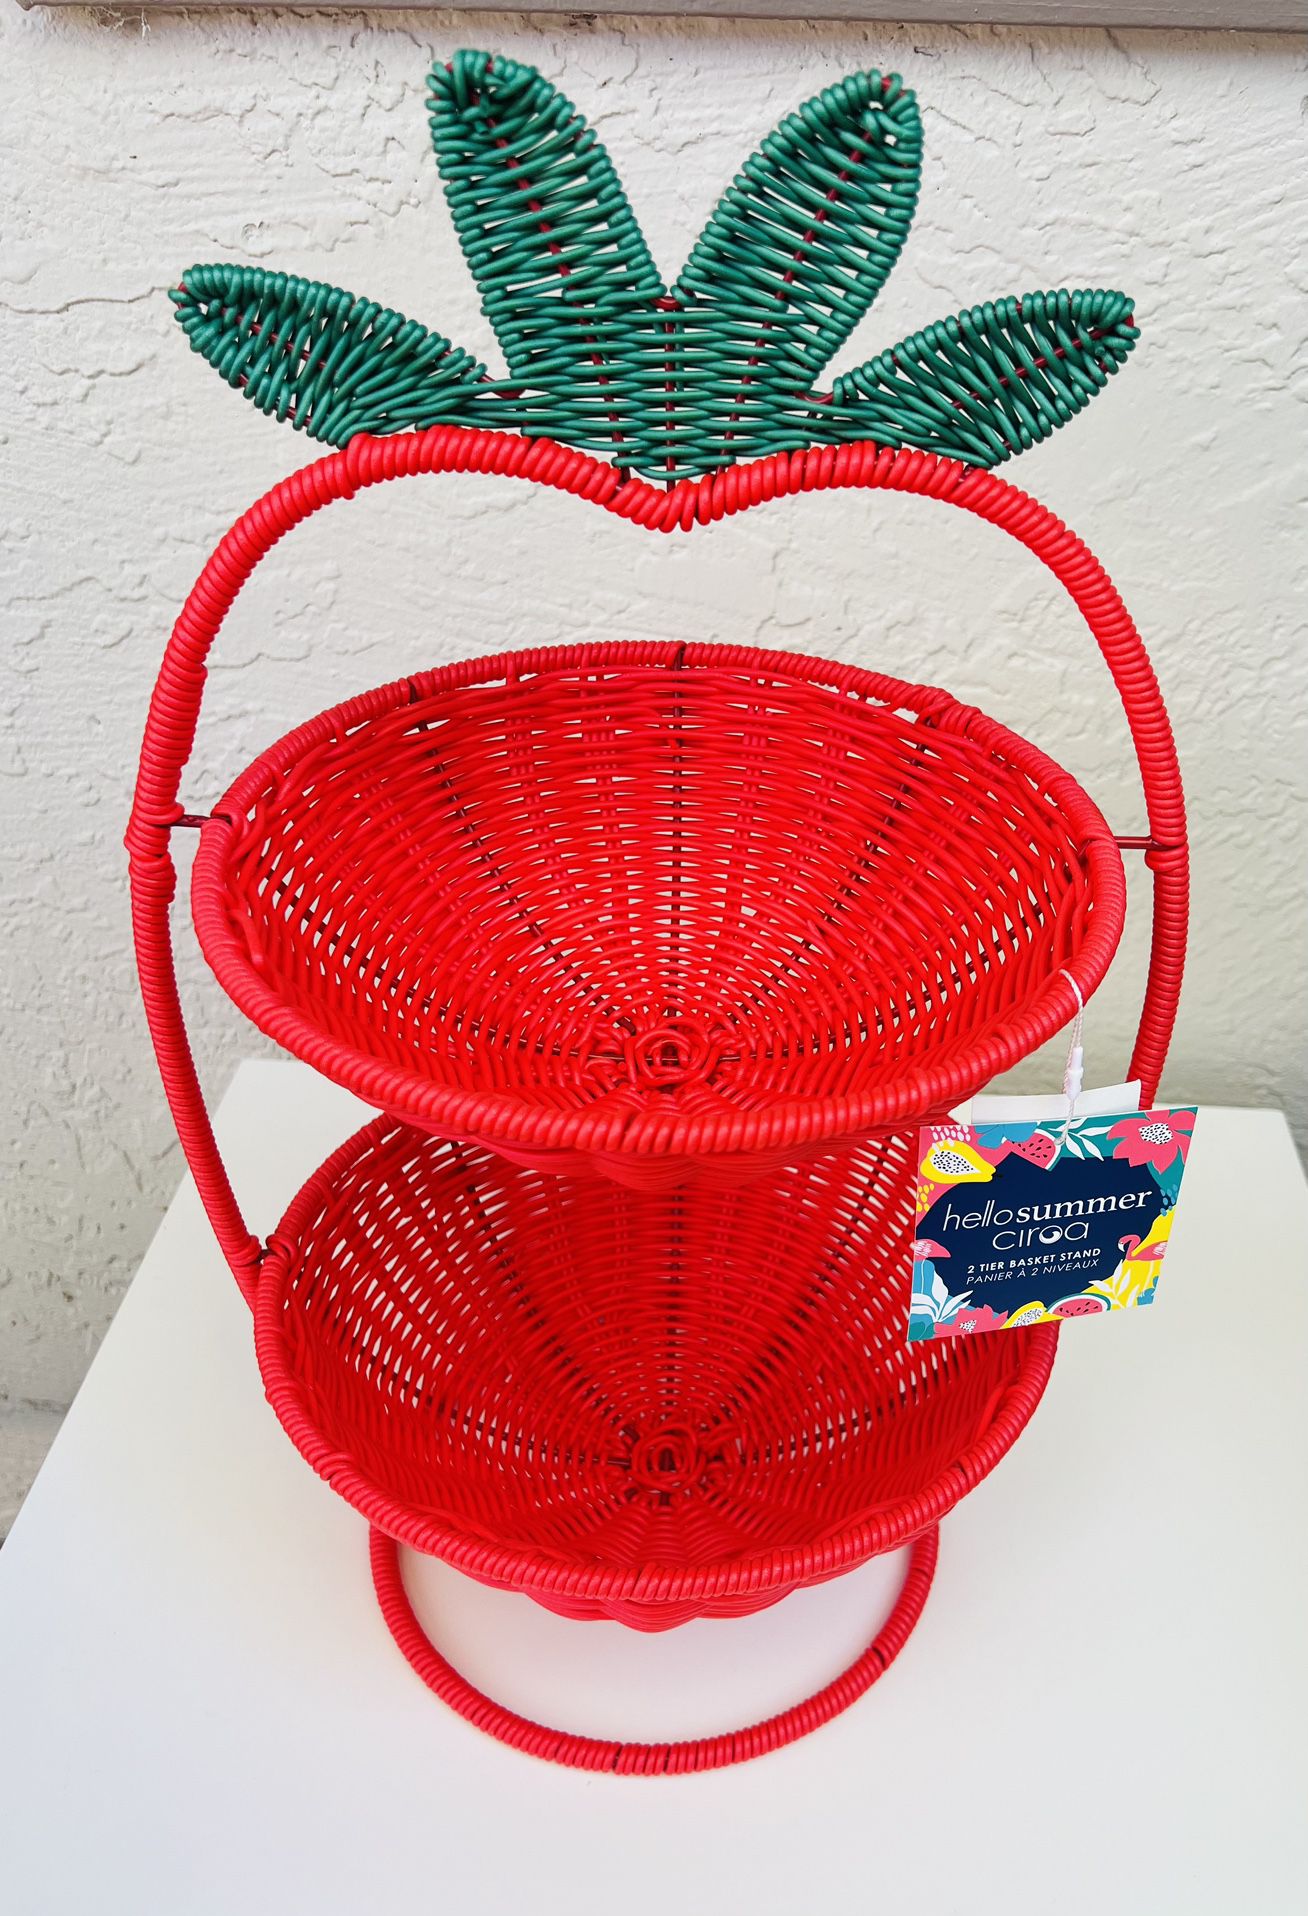 Ciroa Hello Summer Strawberry fruit 2 Tier Resin Wicker Basket Serving Tray Stand